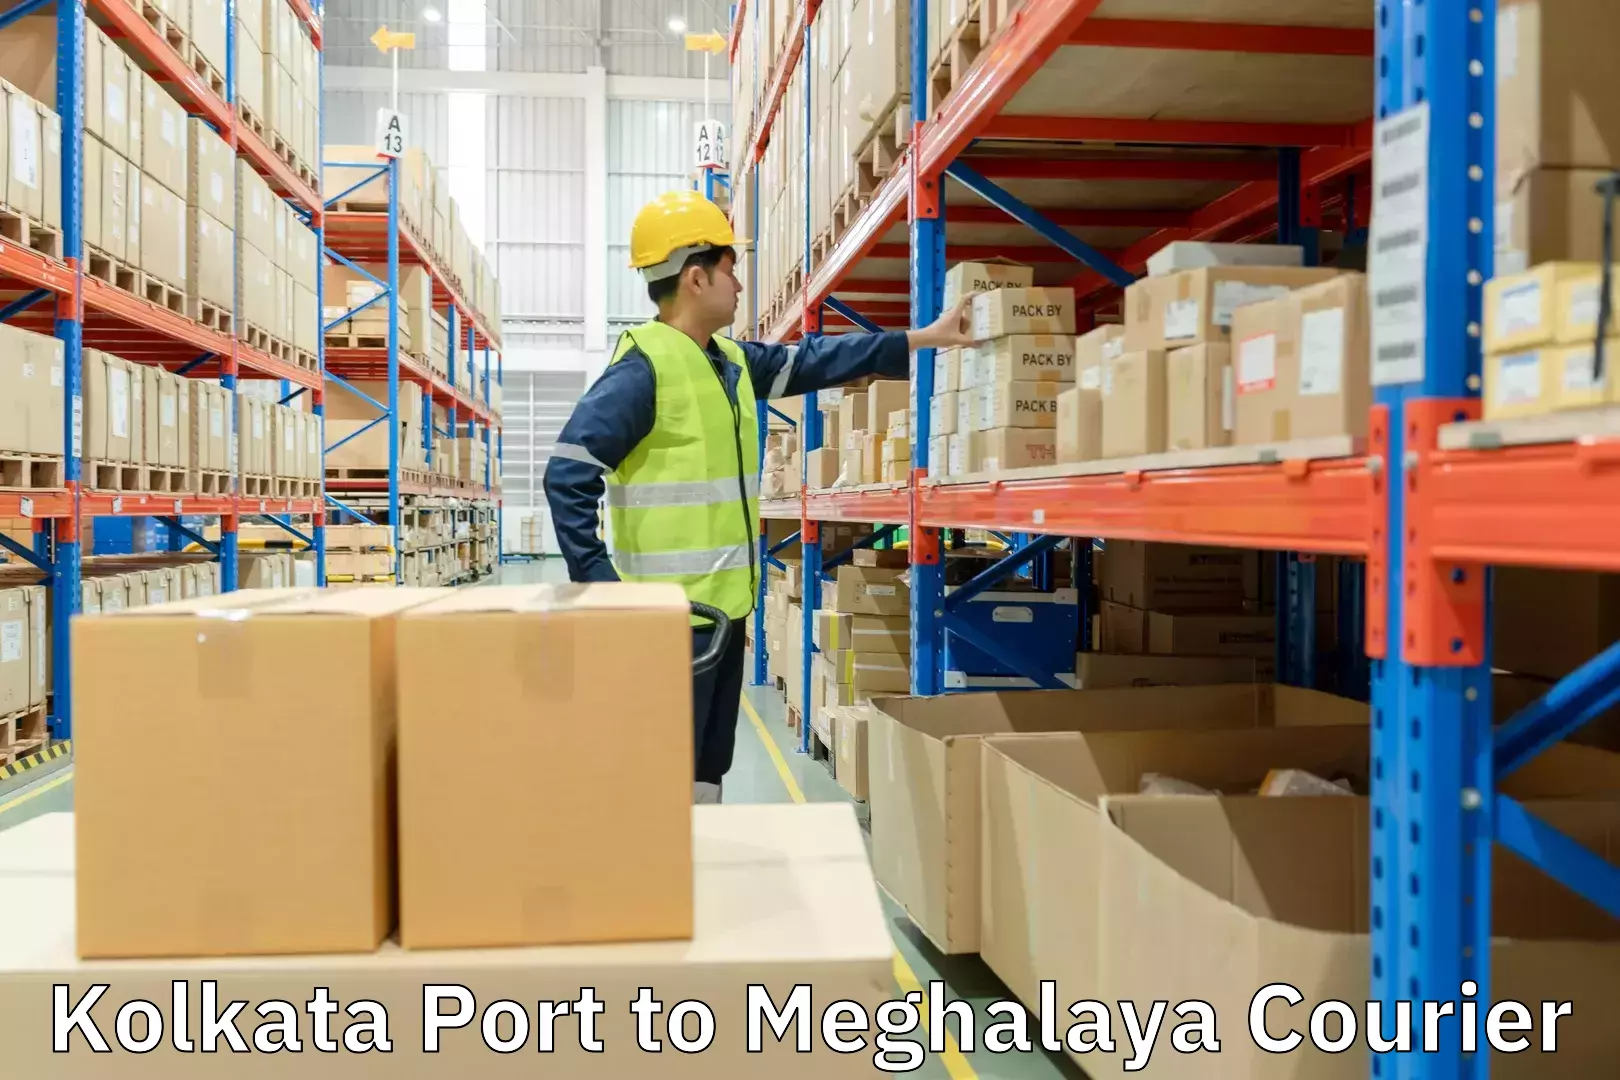 Flexible delivery scheduling Kolkata Port to Jowai